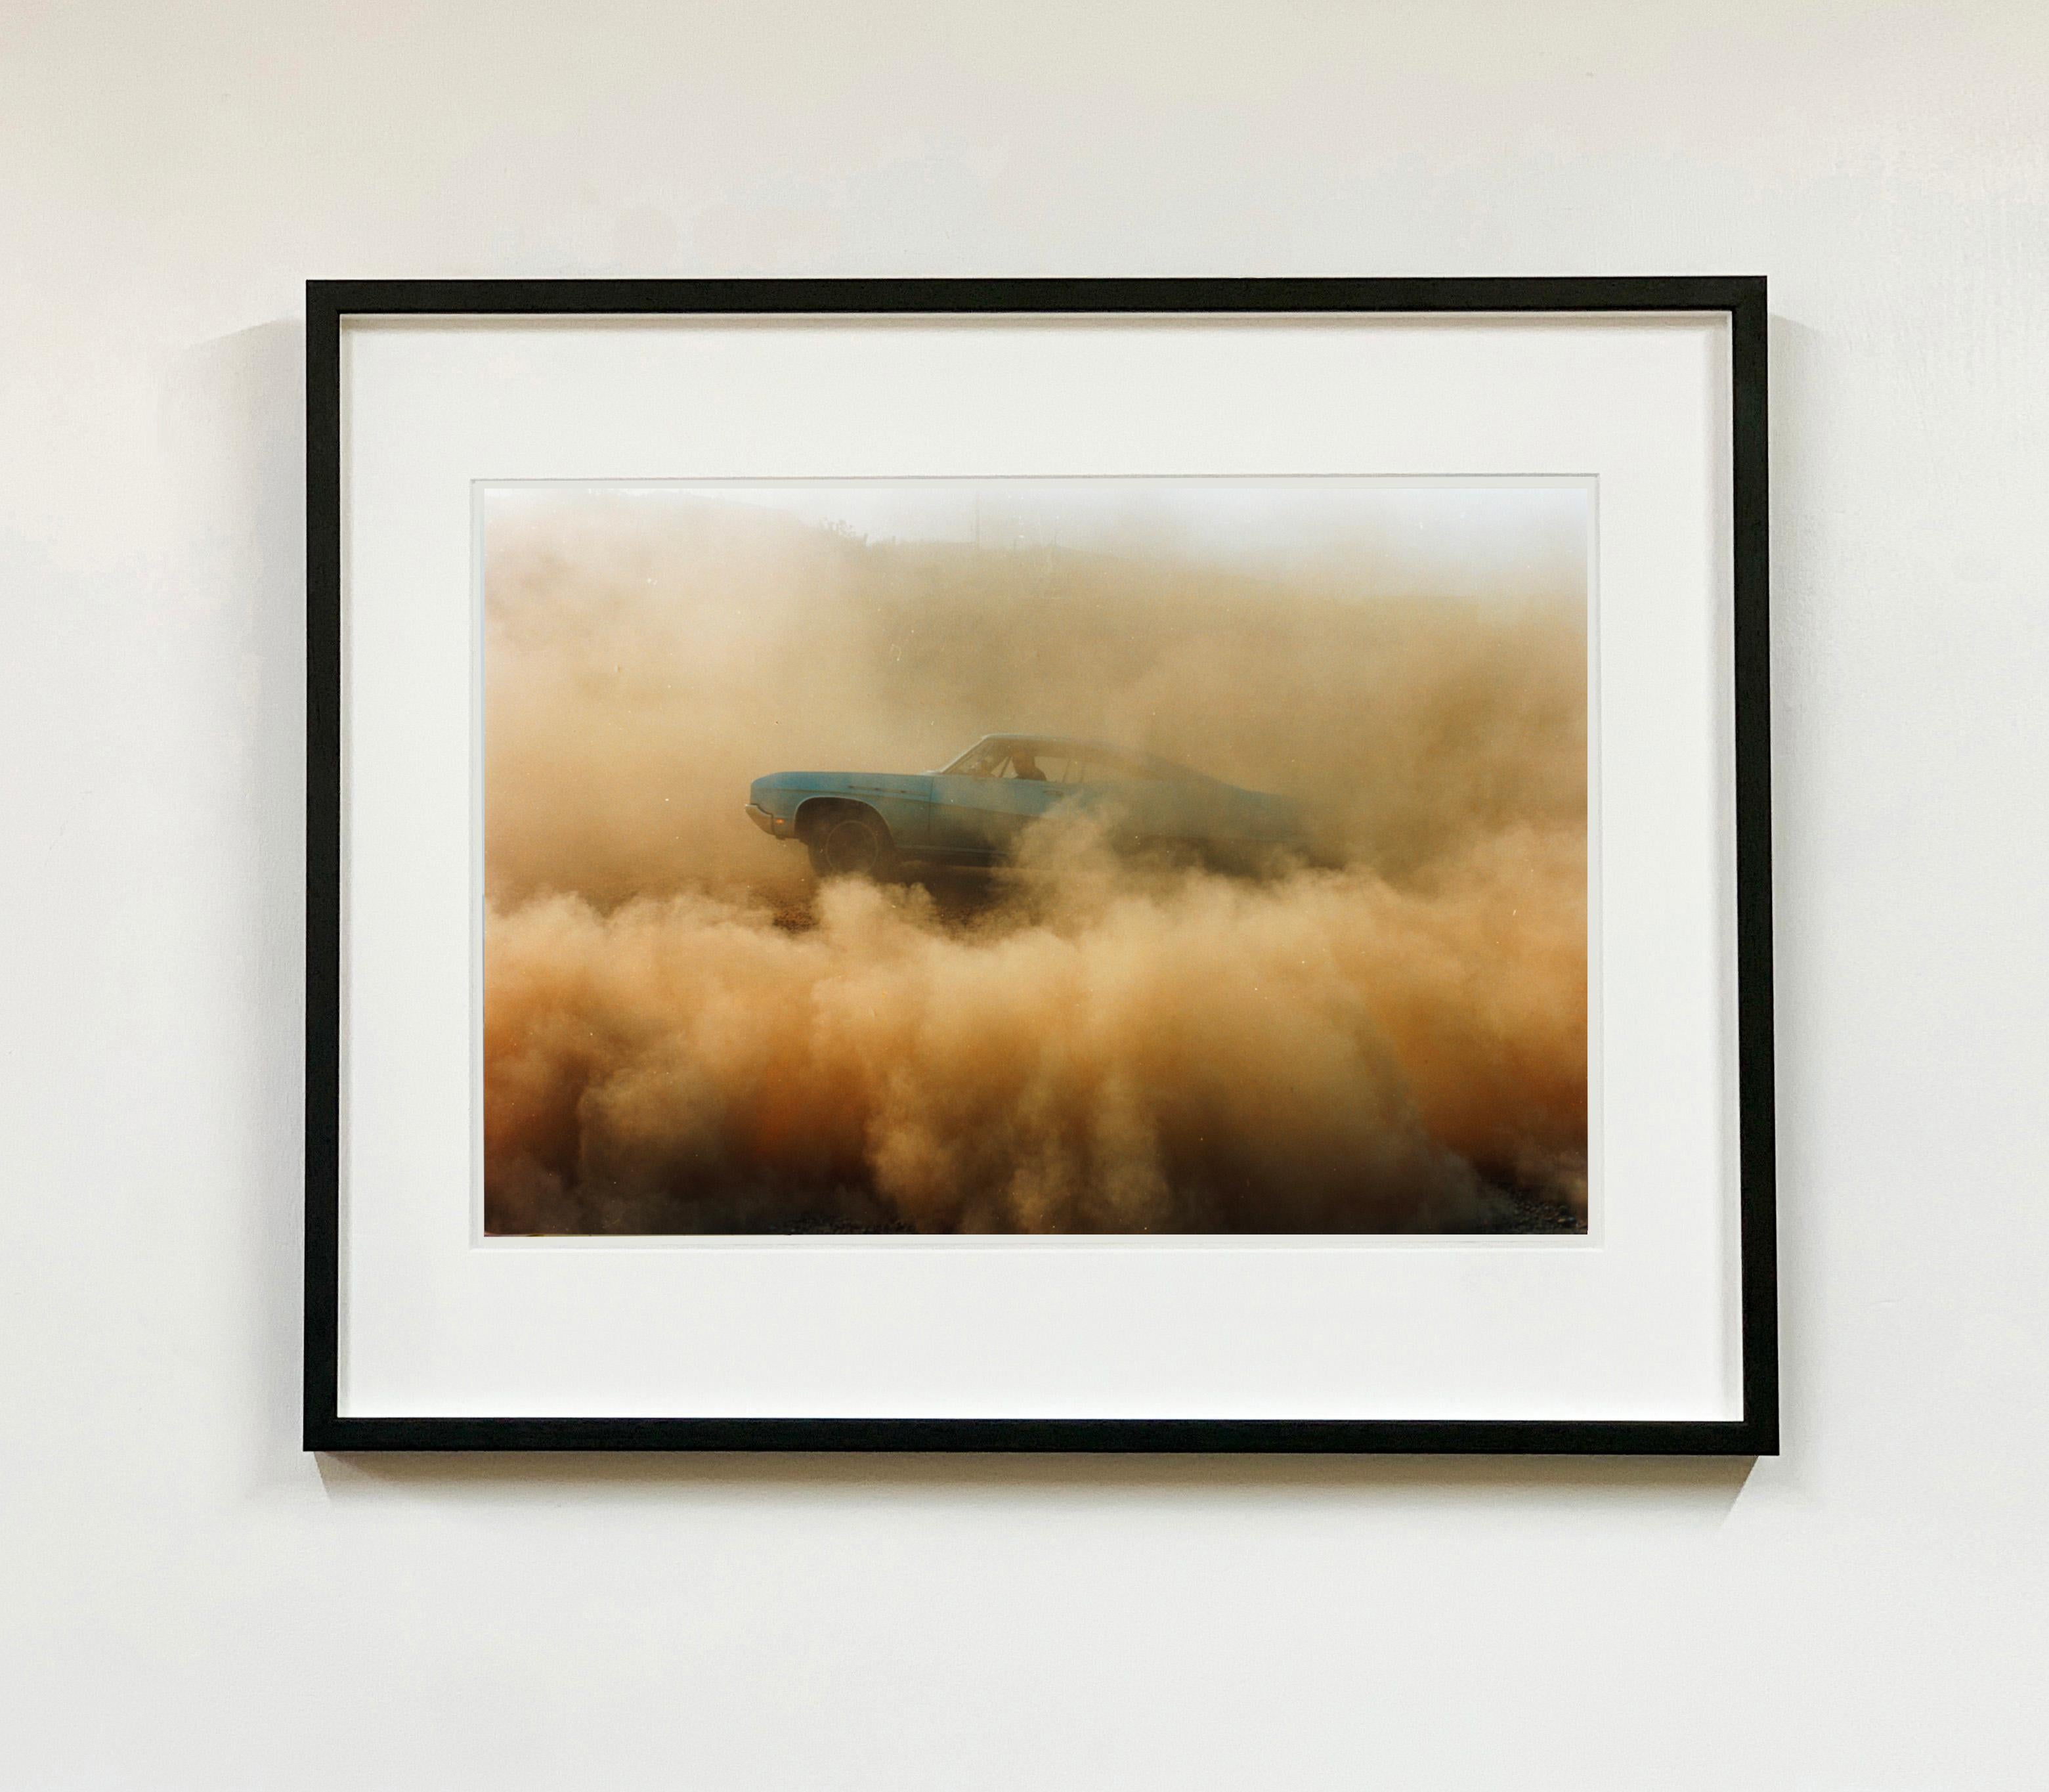 Buick in the Dust I, Hemsby, Norfolk - Color Photography of a Car - Print by Richard Heeps